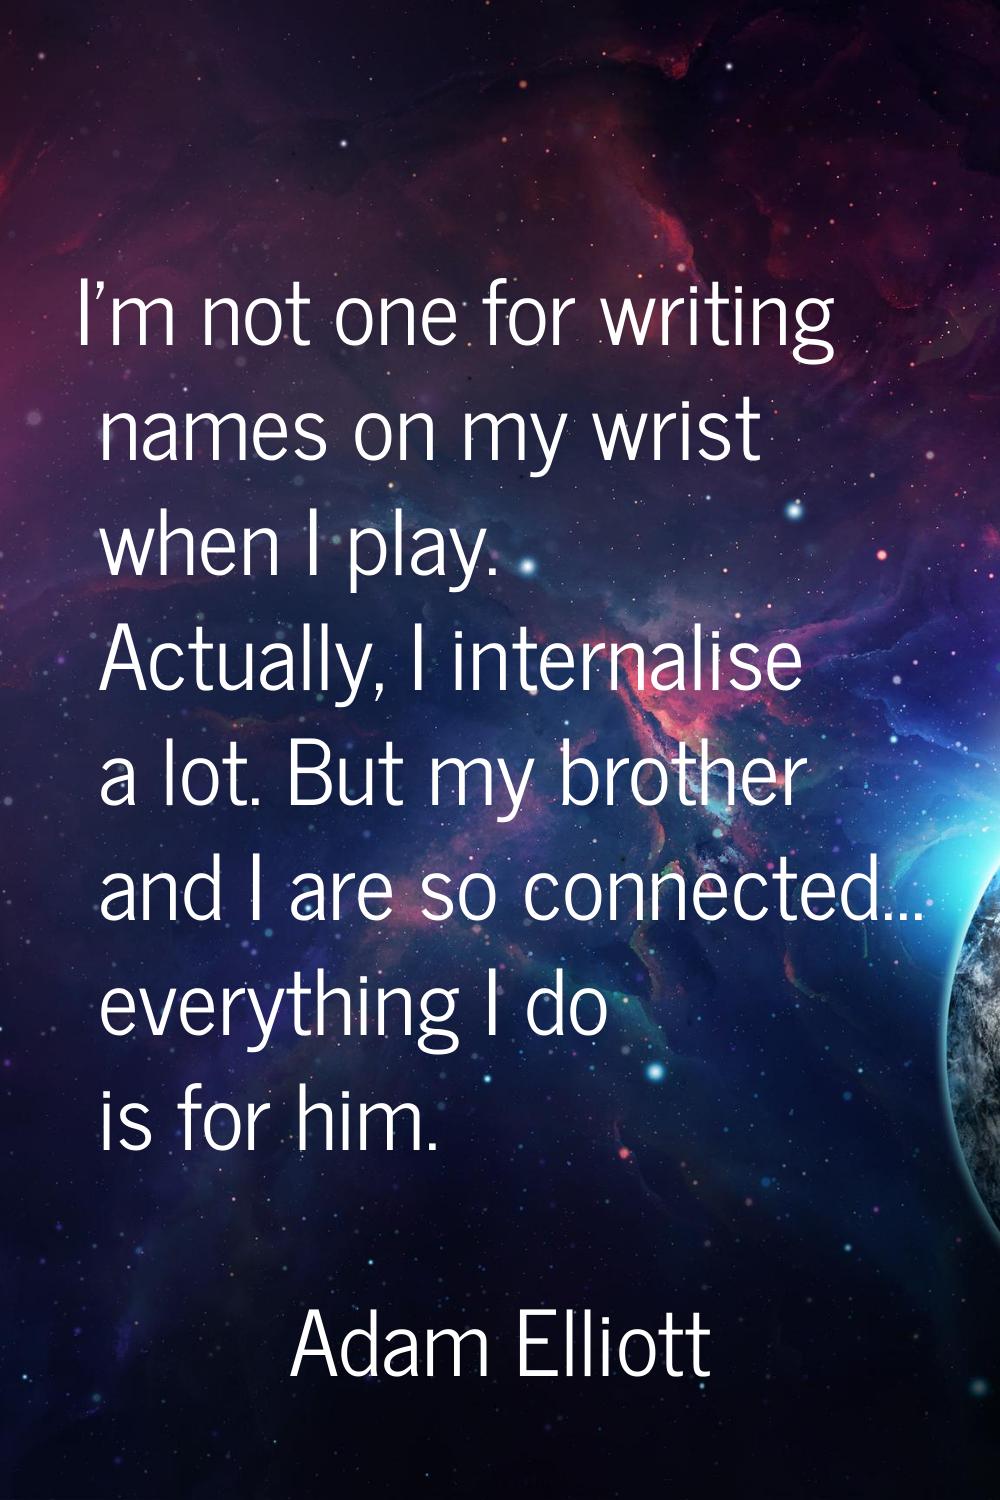 I'm not one for writing names on my wrist when I play. Actually, I internalise a lot. But my brothe